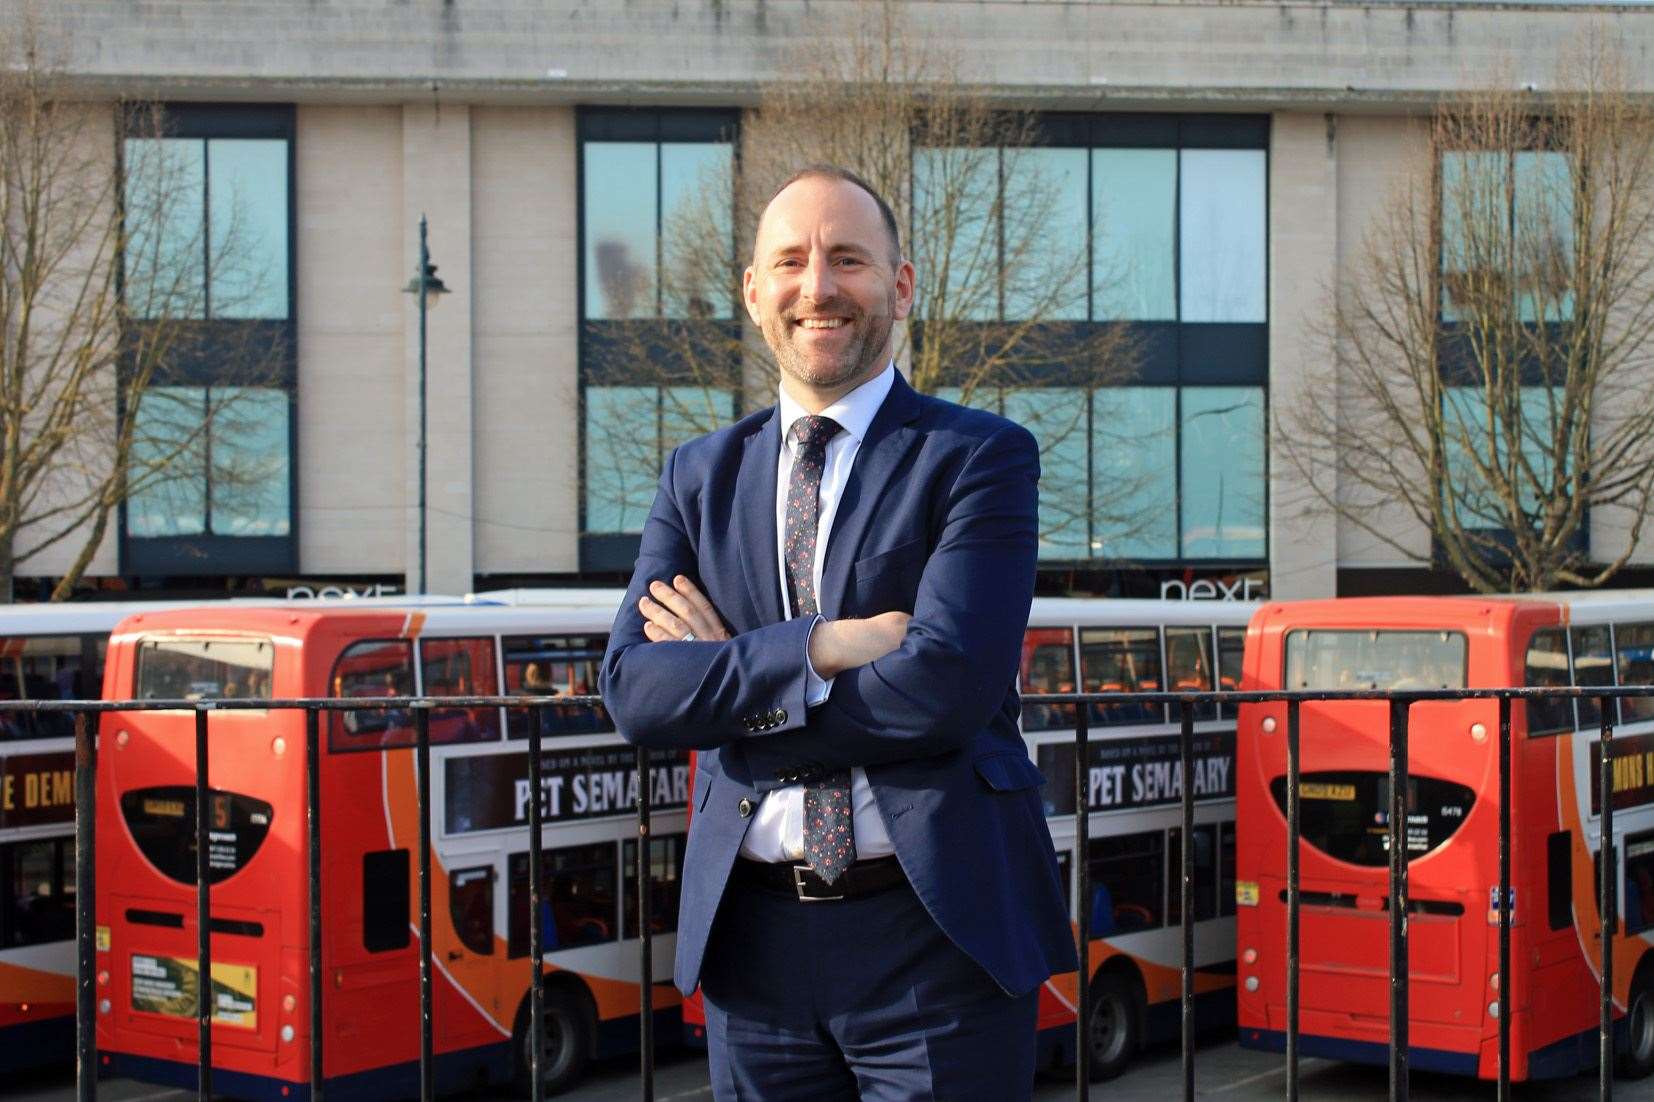 Stagecoach South East’s Managing Director Joel Mitchell